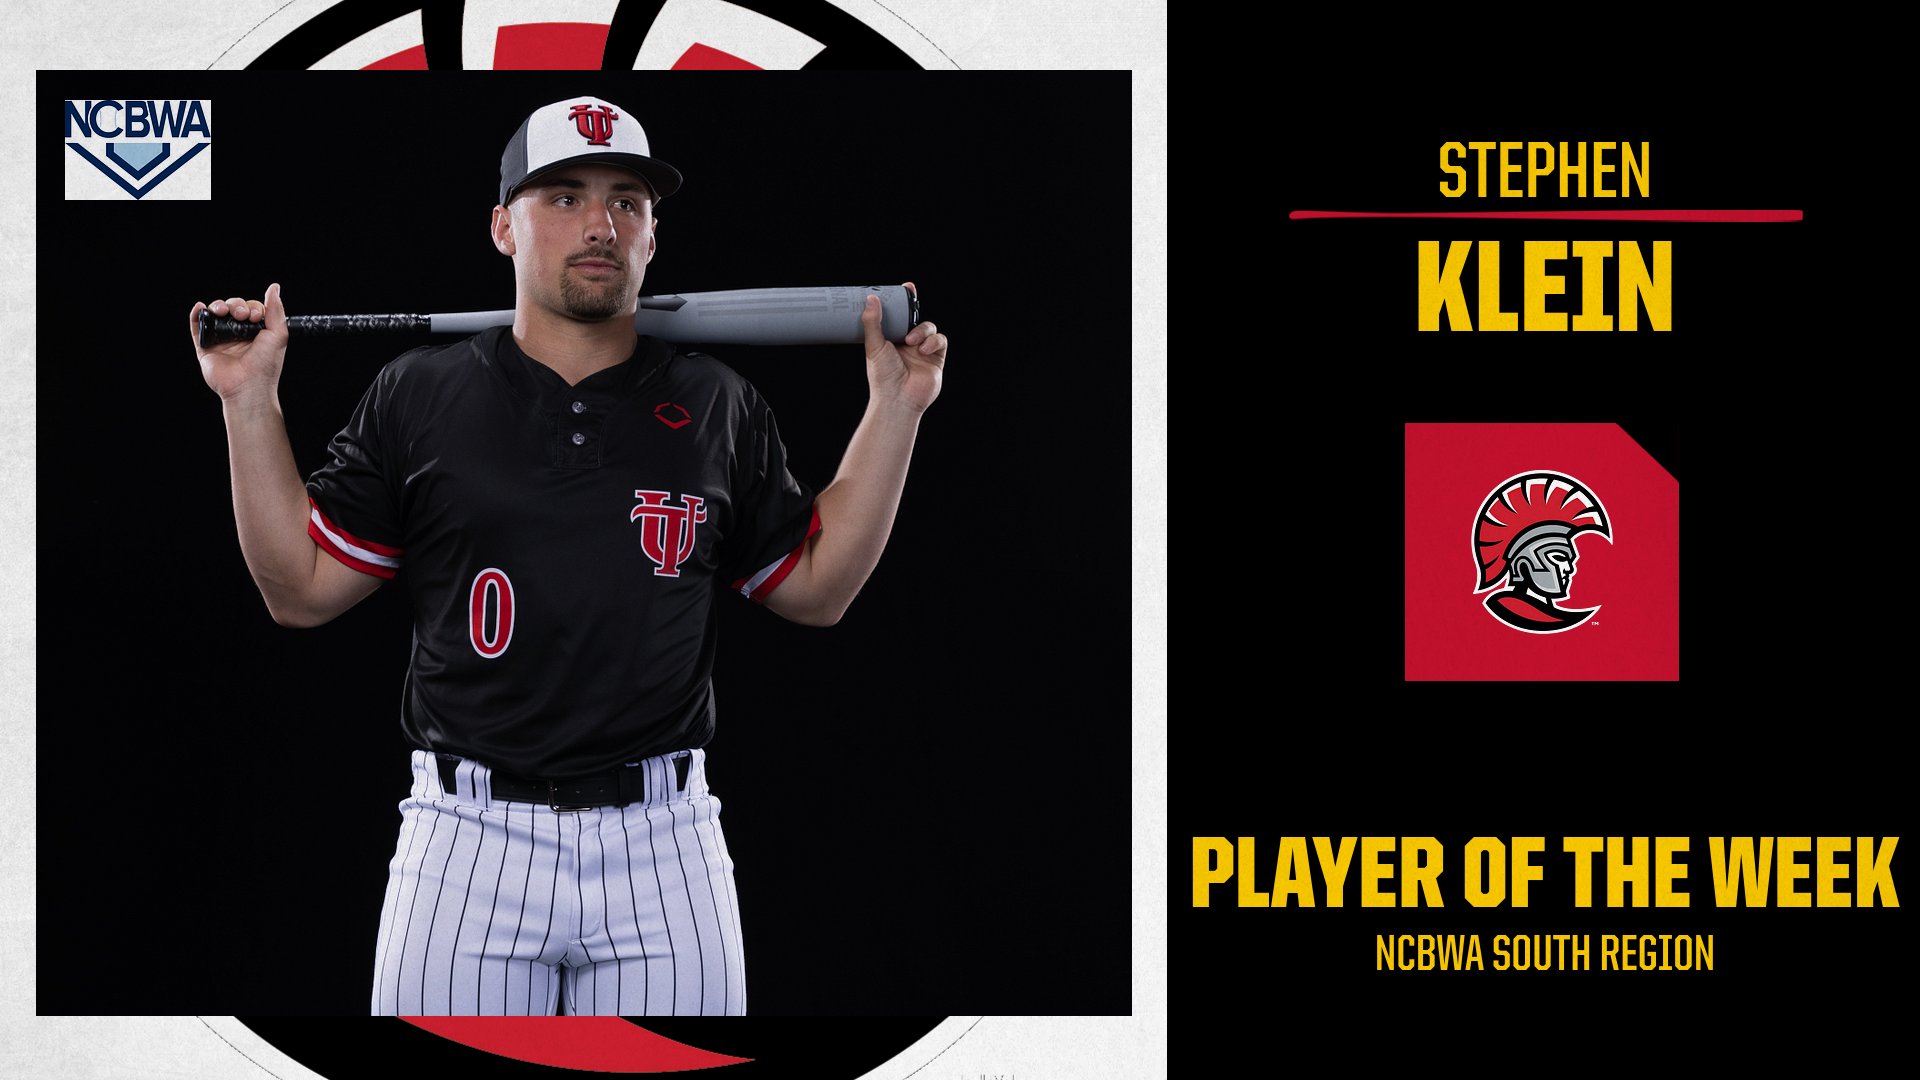 NCBWA South Region Player of the Week Stephen Klein